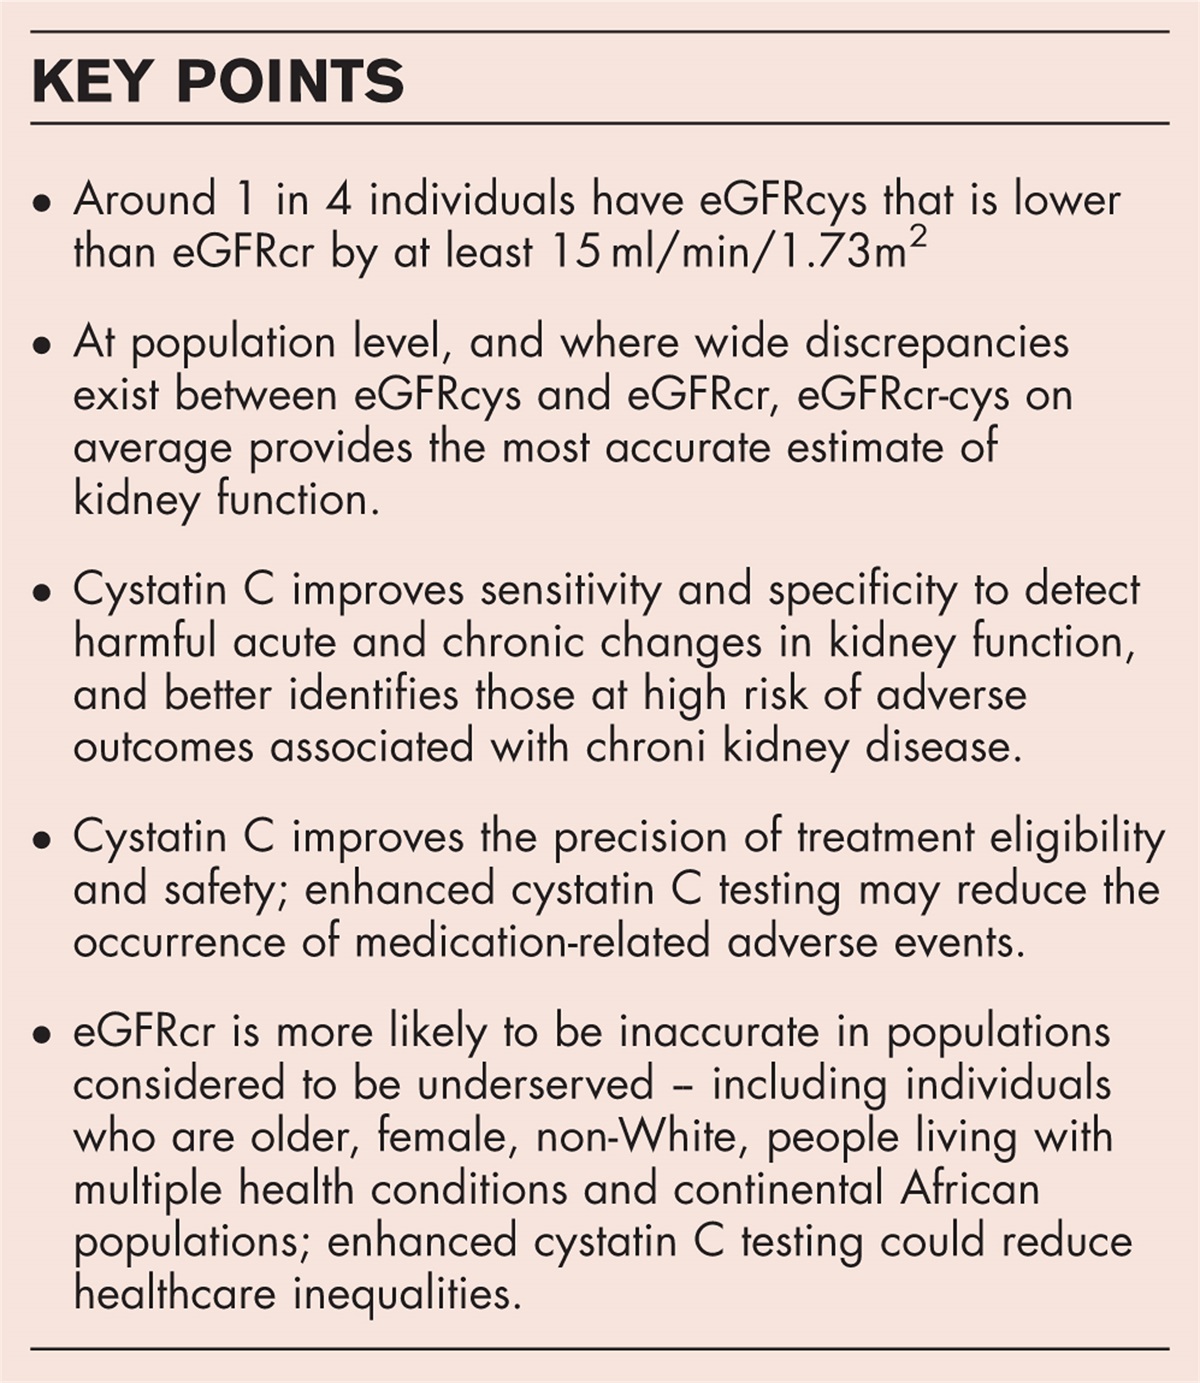 Cystatin C should be routinely available for estimating kidney function